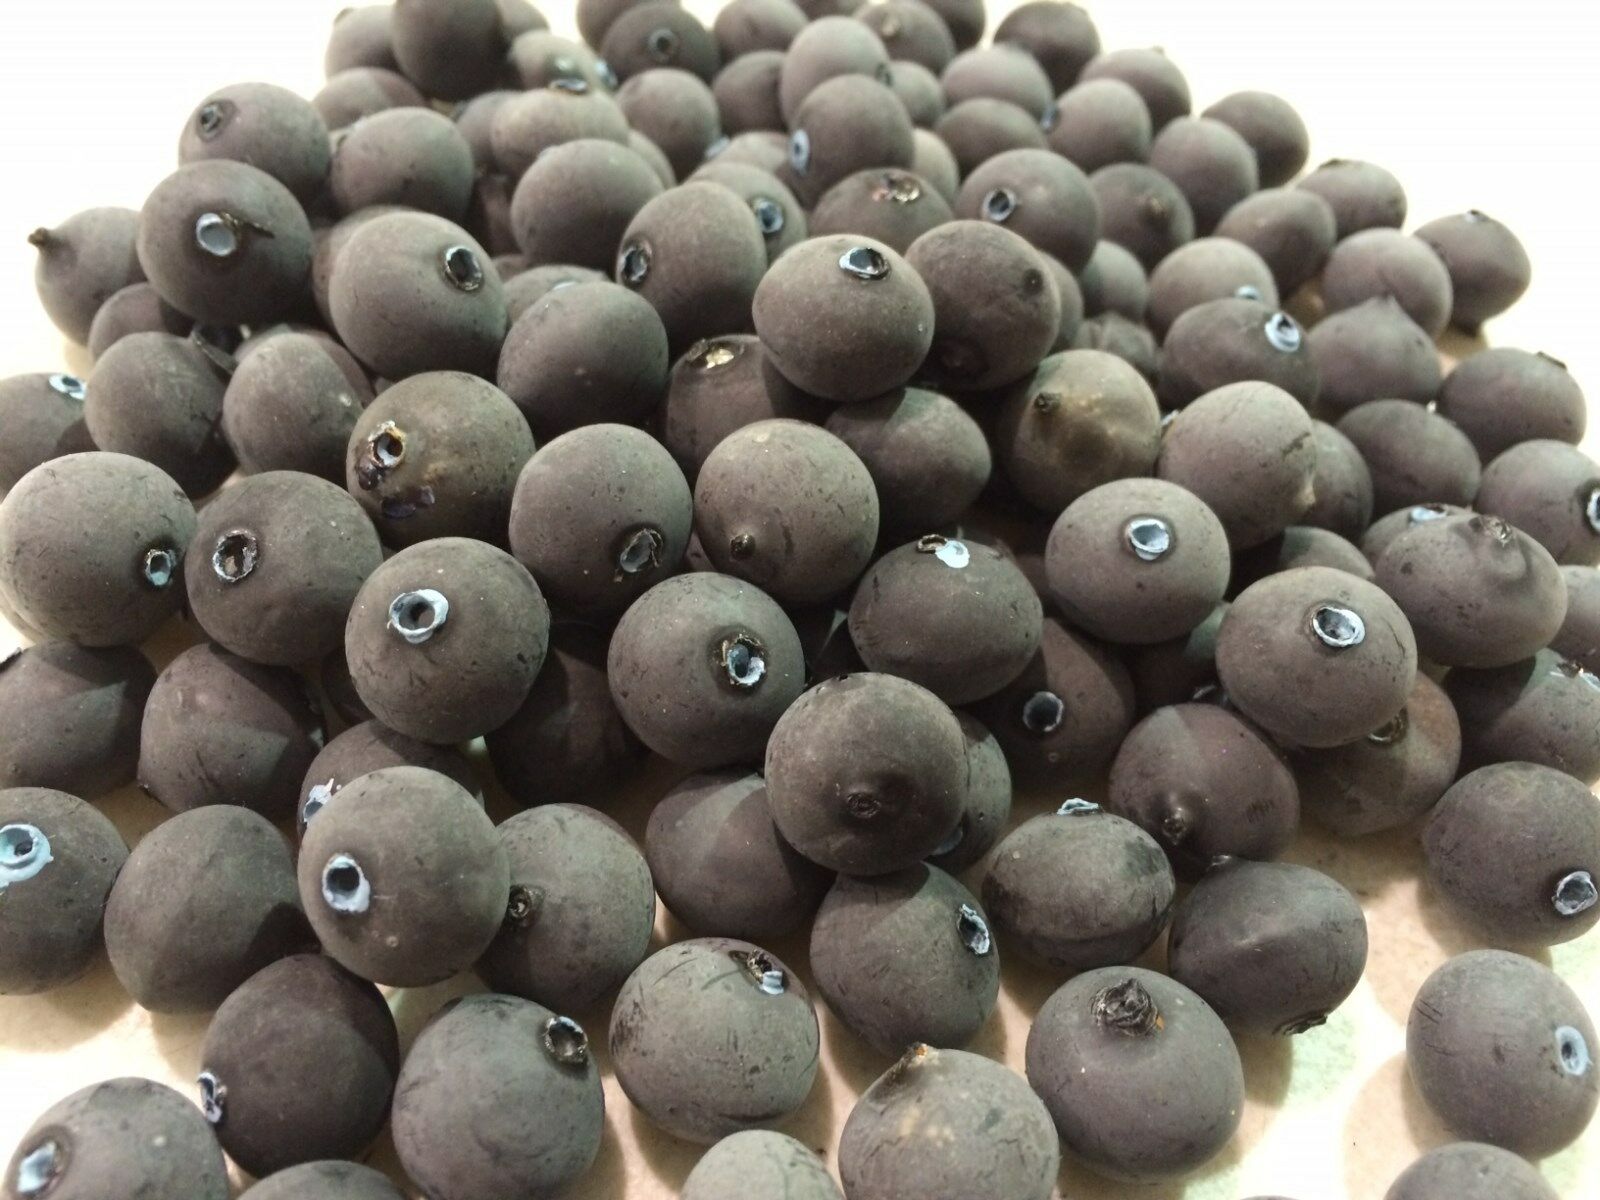 Artificial Blueberry, Bag Of 144 Decorative Fake Fruit Berries, Fake Blueberries